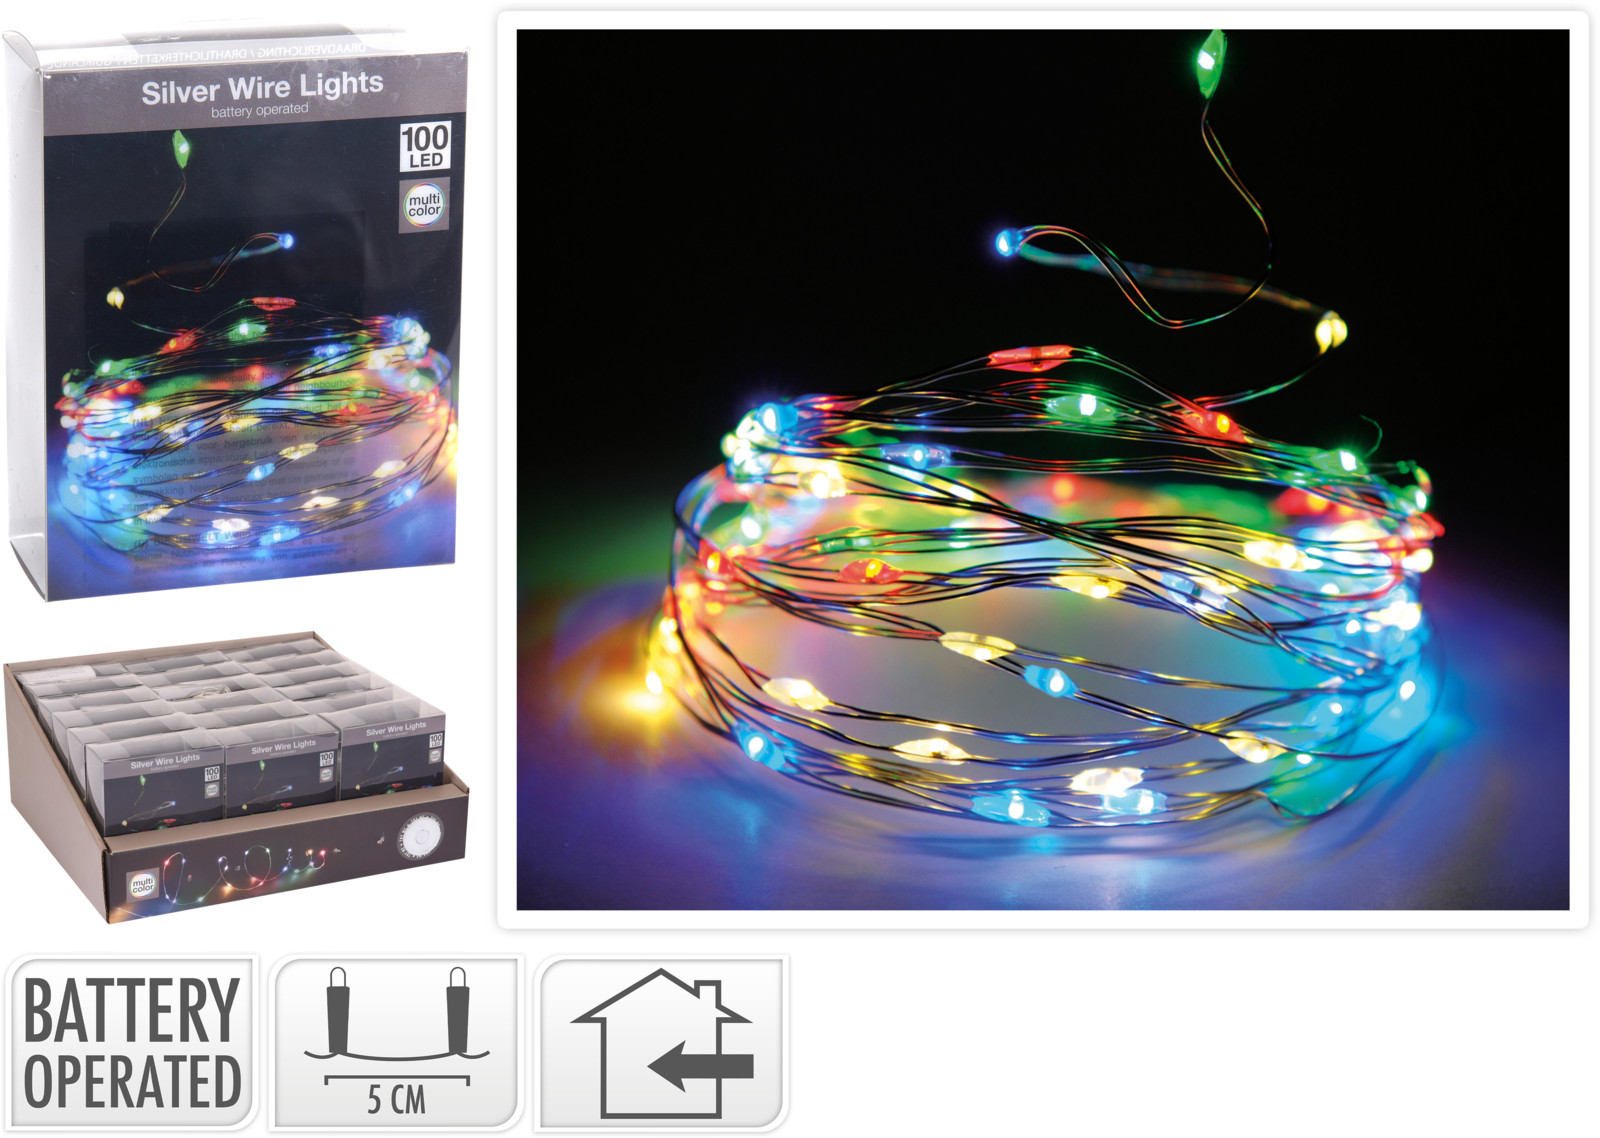 SILVERWIRE LIGHTS 100LED